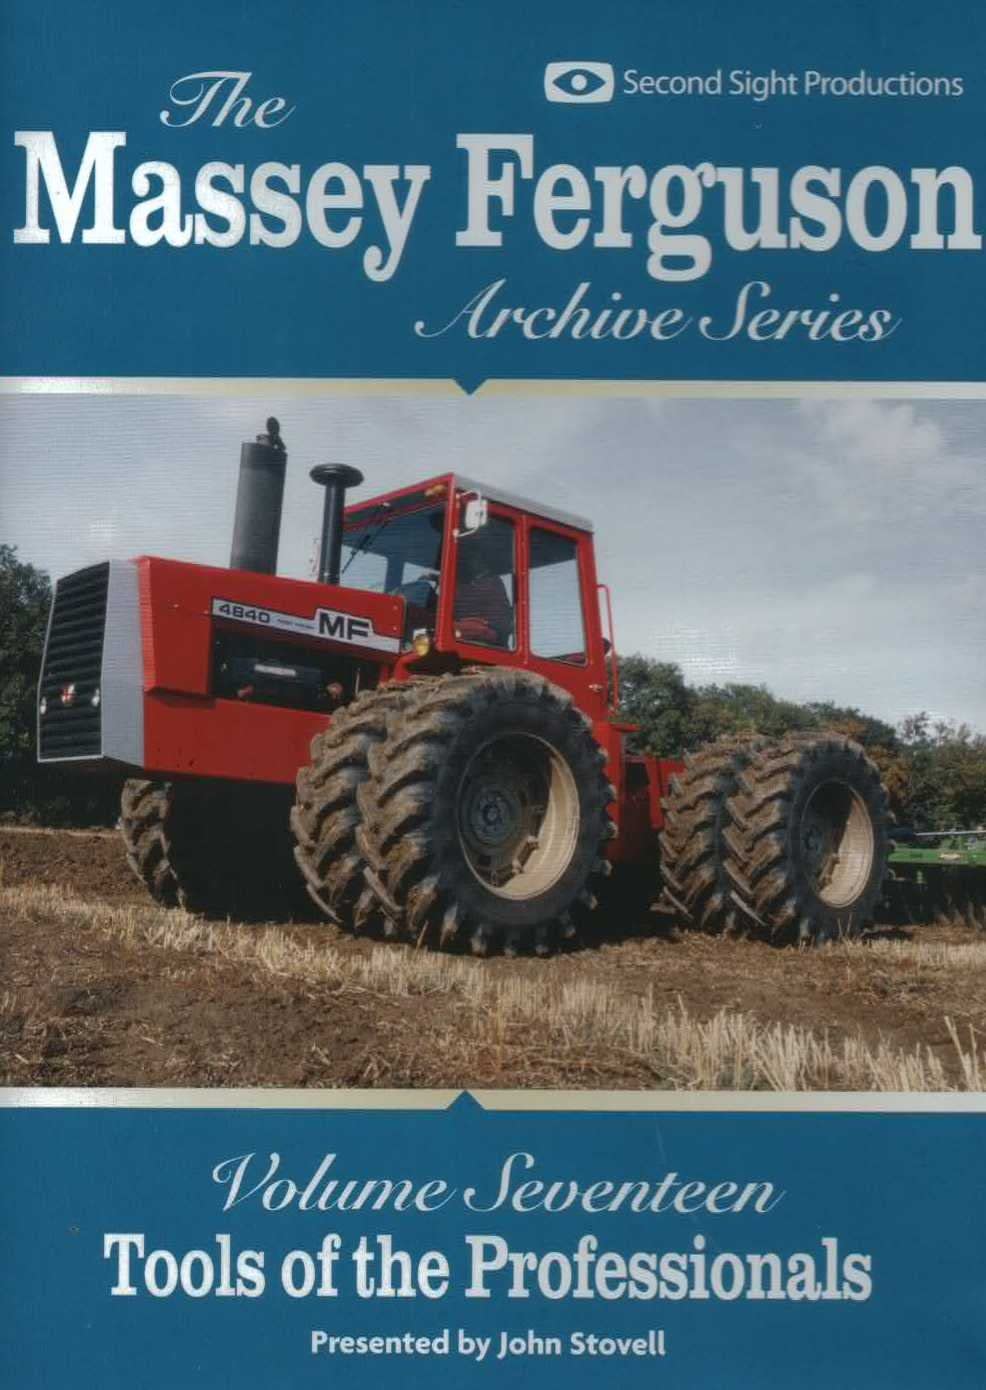 THE MASSEY FERGUSON ARCHIVE SERIES Volume 17 Tools Of The Professionals